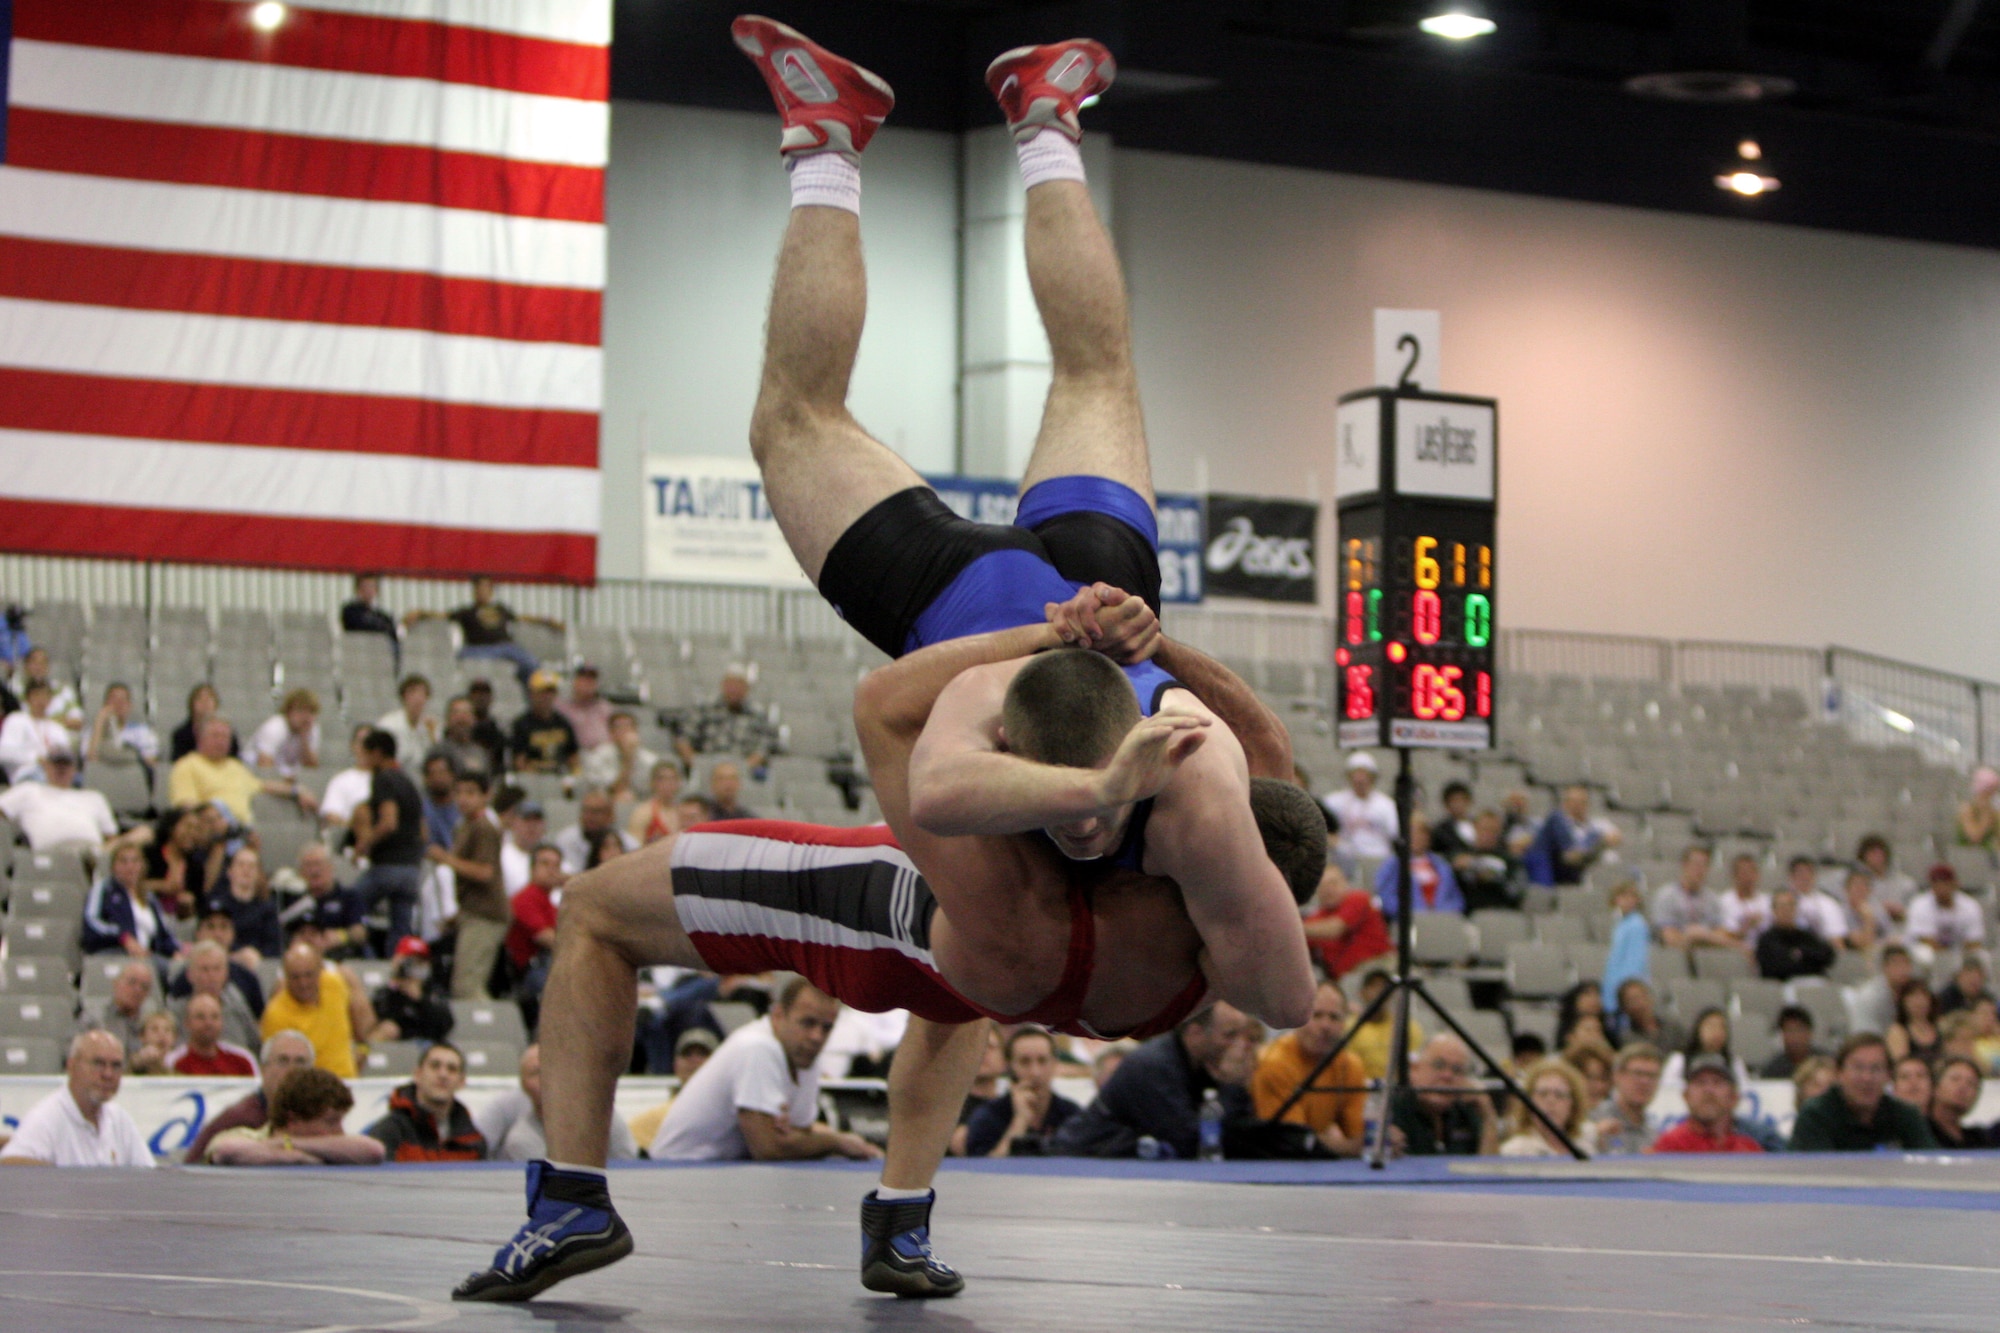 LAS VEGAS -- Philip Johnston (bottom), a 211.2-pound division Greco-Roman wrestler, pulls off a lift and throw on his opponent, J.D. Bergman of the Ohio International Wrestling Club, during a consolation match of the 2005 U.S. Nationals Wrestling tournament held here April 29.  Johnston won the match 5-0, 8-0, and took 3rd place in his weight class.  (U.S. Air Force photo by Master Sgt. Robert W. Valenca)